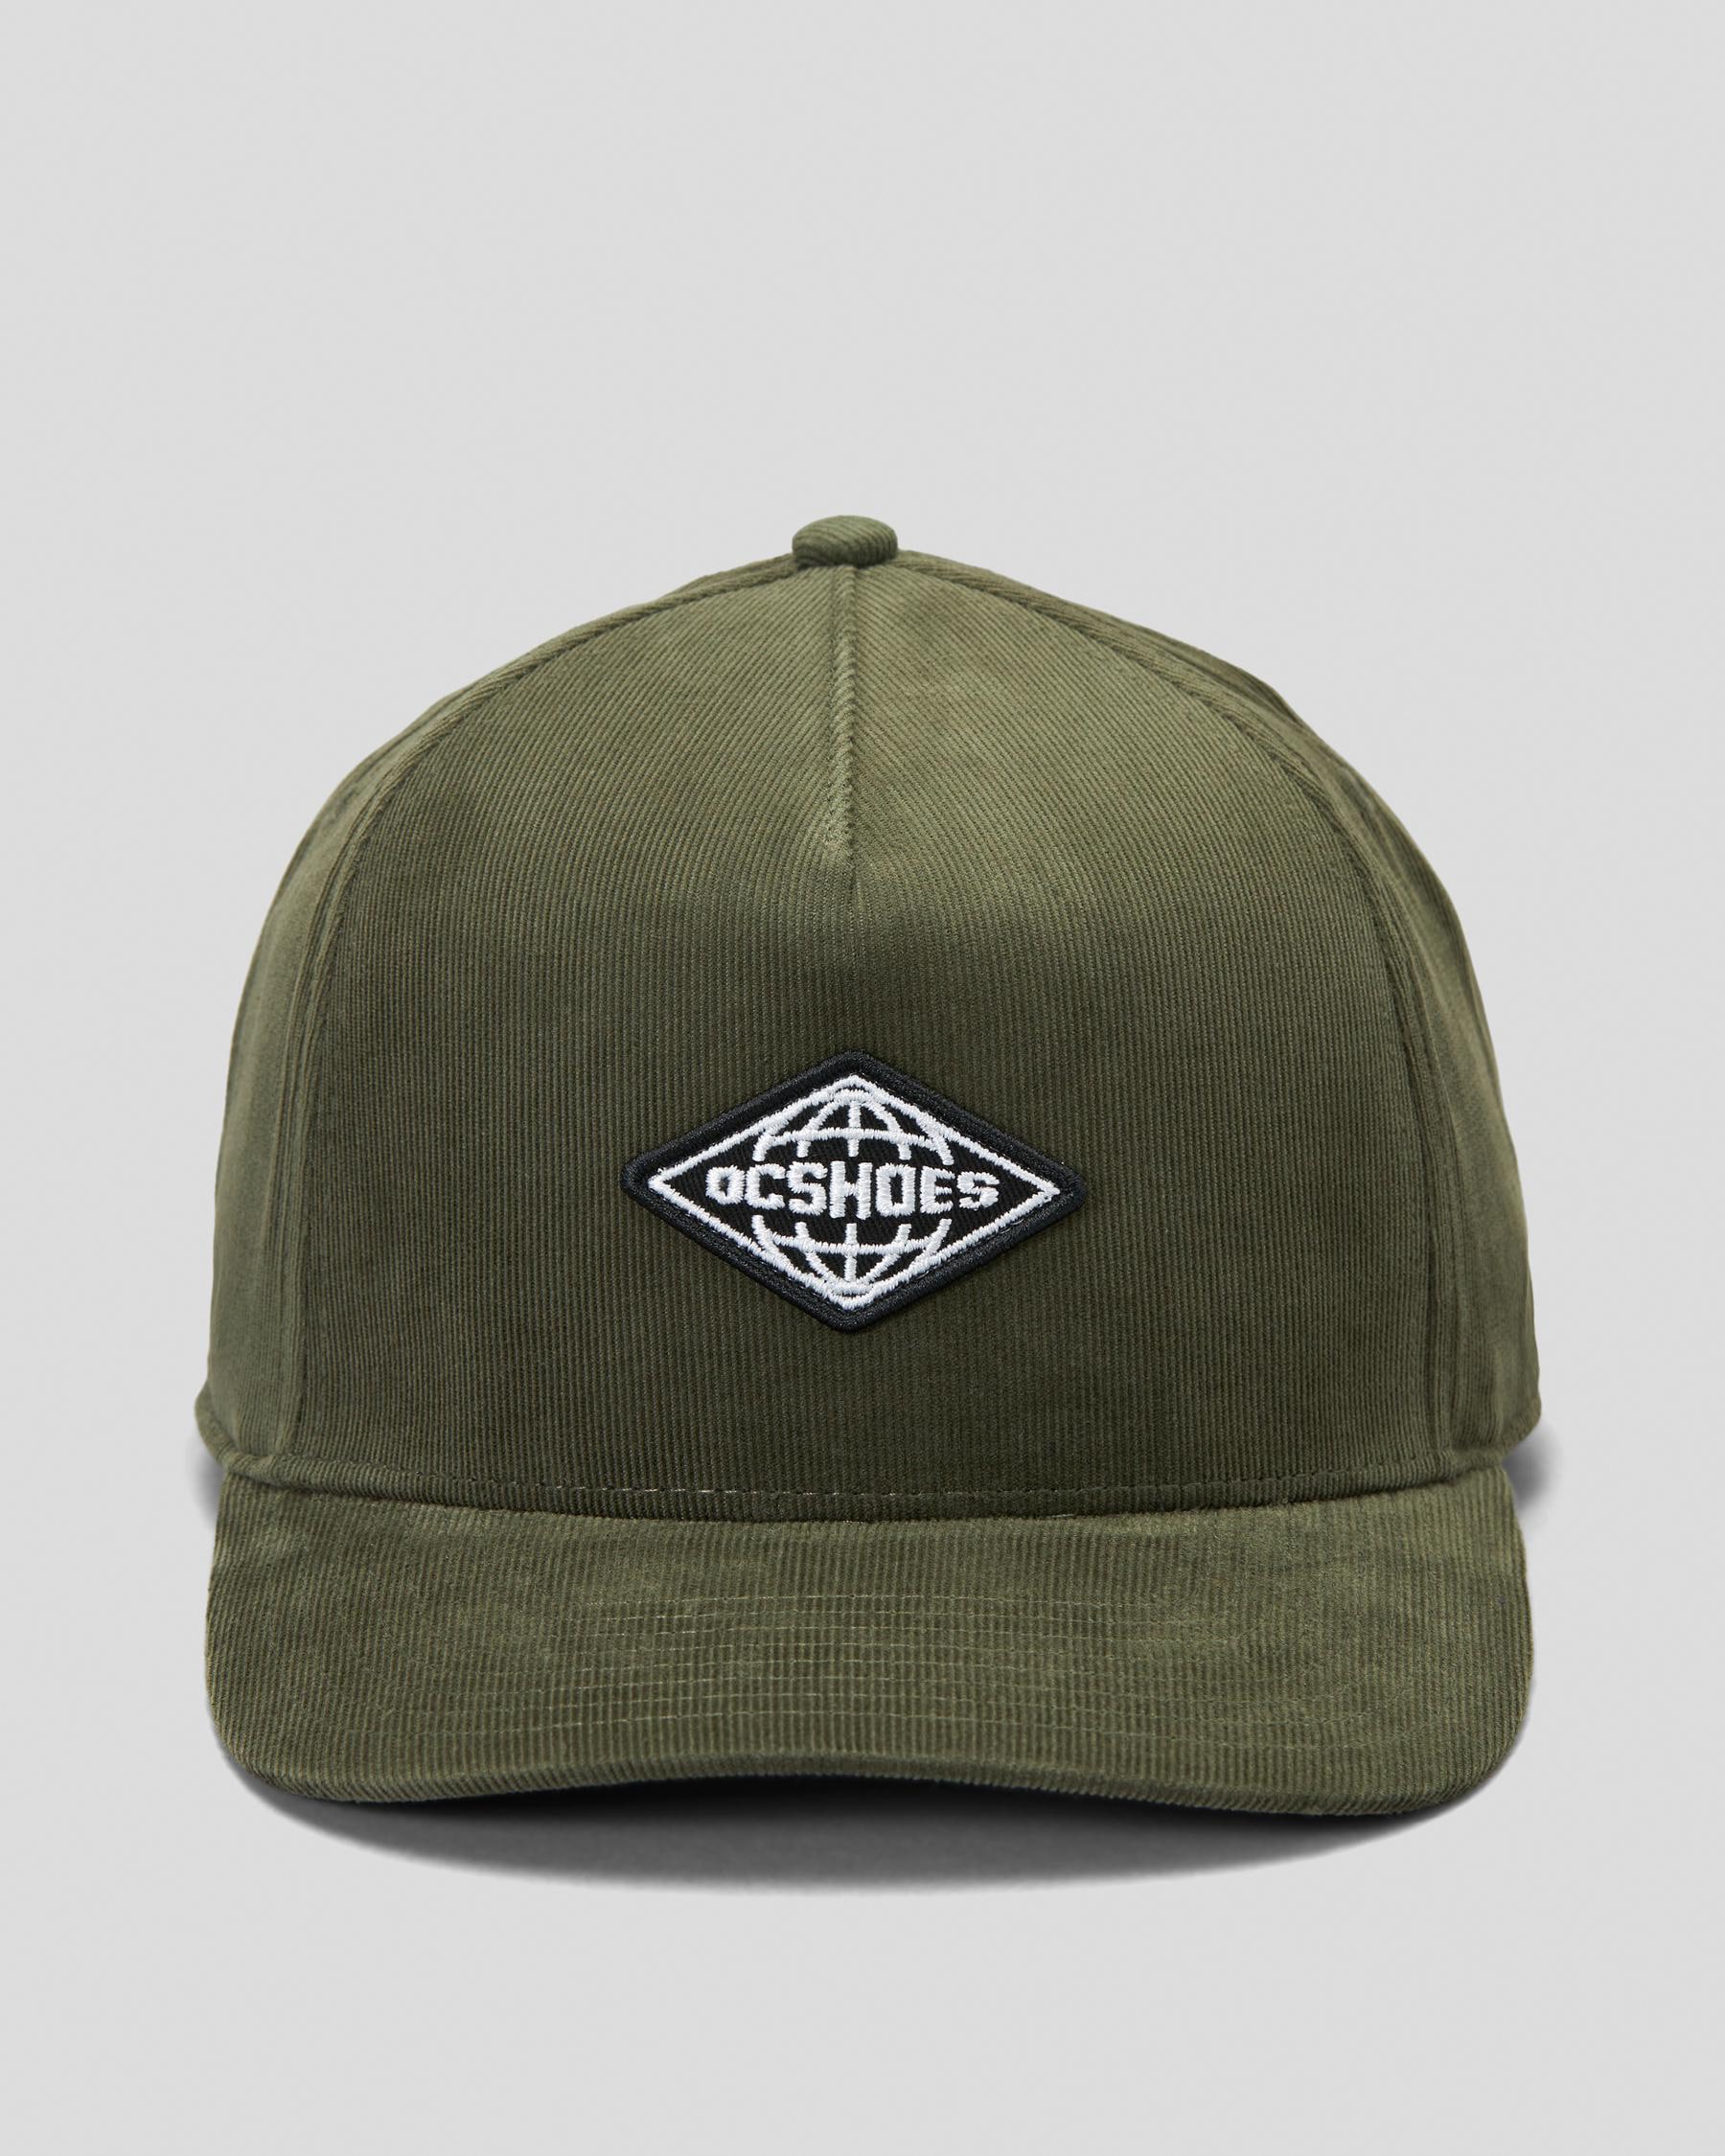 DC Shoes & States Beach DC Shipping - Easy Returns In Snapback United - City Cap Expo FREE* Capers